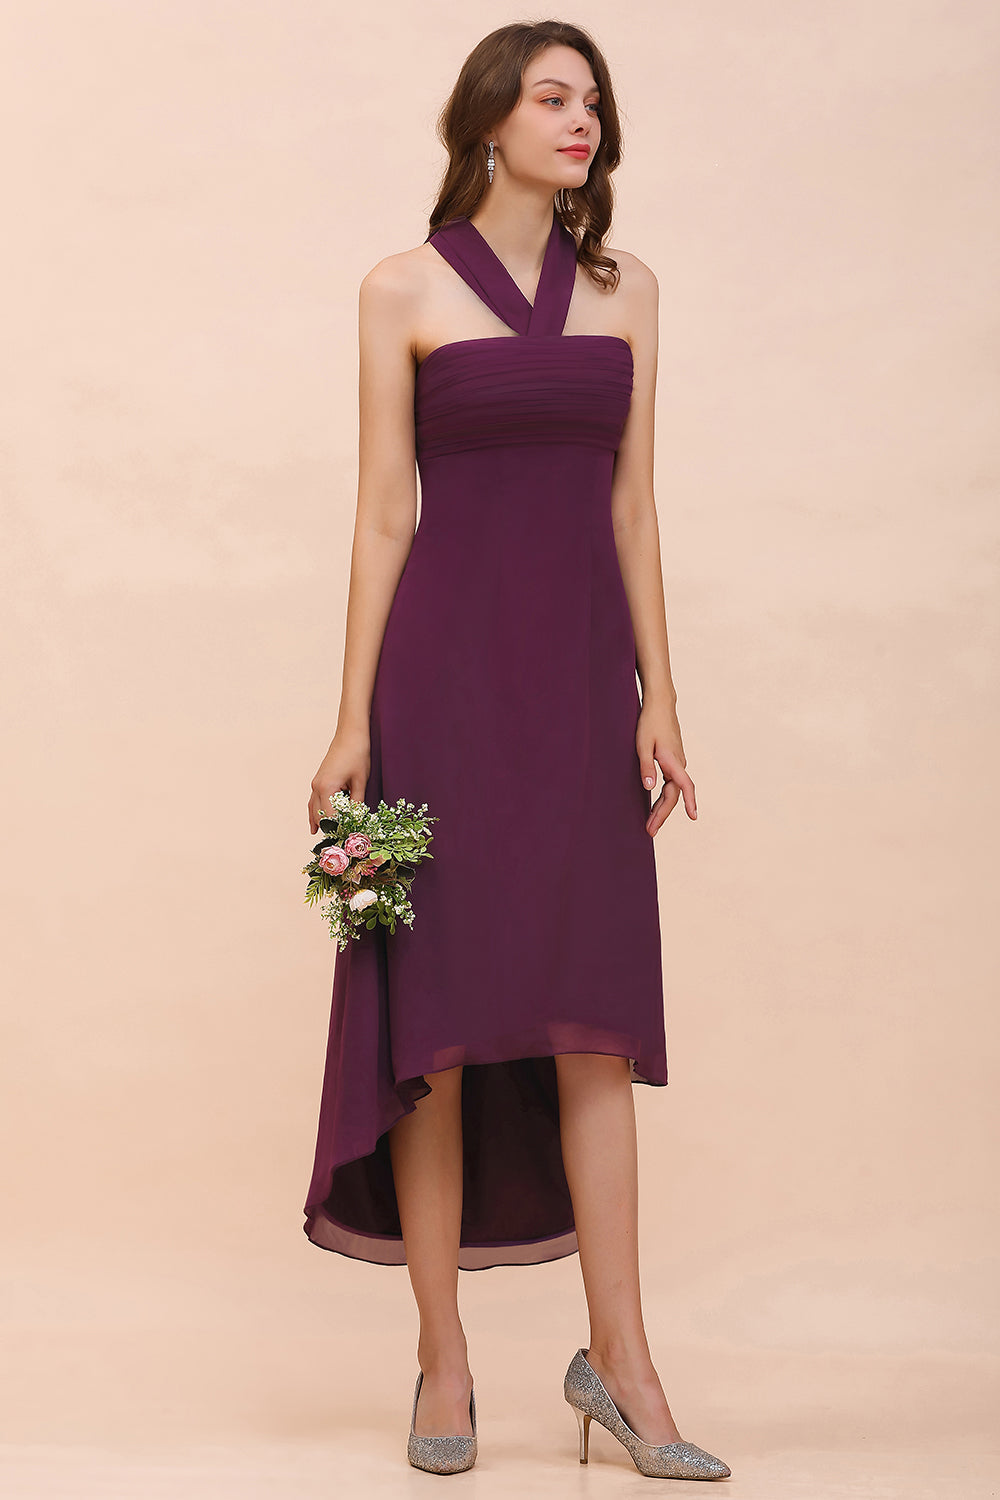 Load image into Gallery viewer, Stylish Hi-Lo Halter Grape Chiffon Affordable Bridesmaid Dresses with Ruffle-27dress
